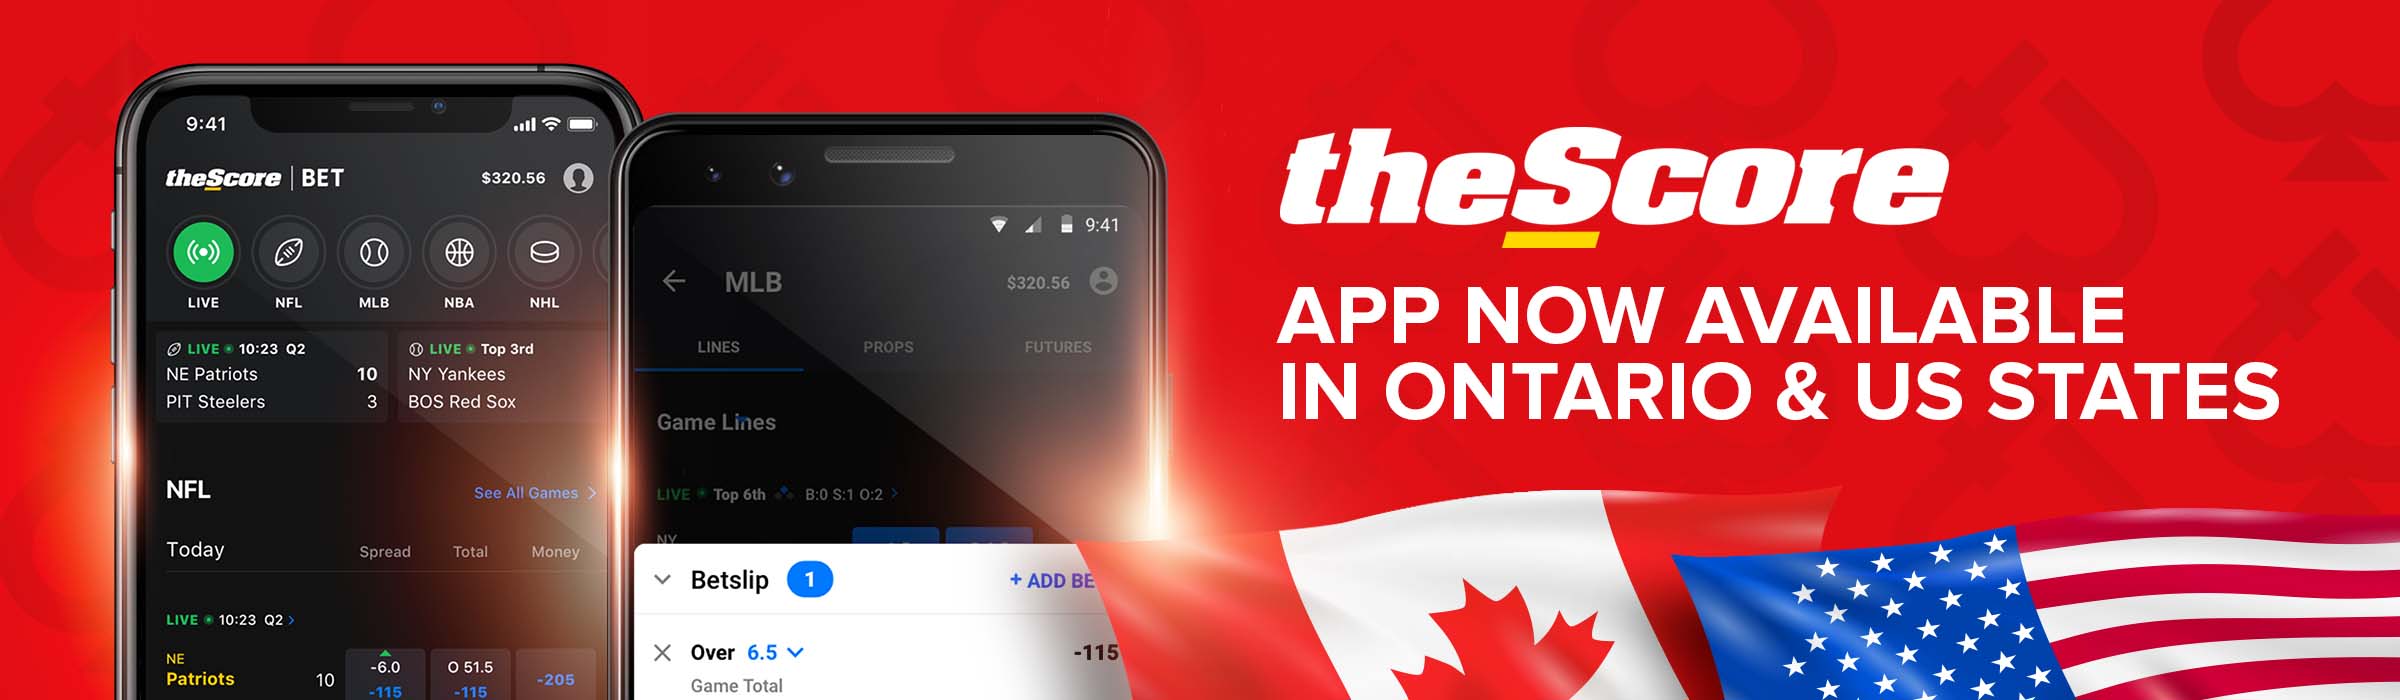 theScore Preparing to Launch App in Ontario and 4 US States